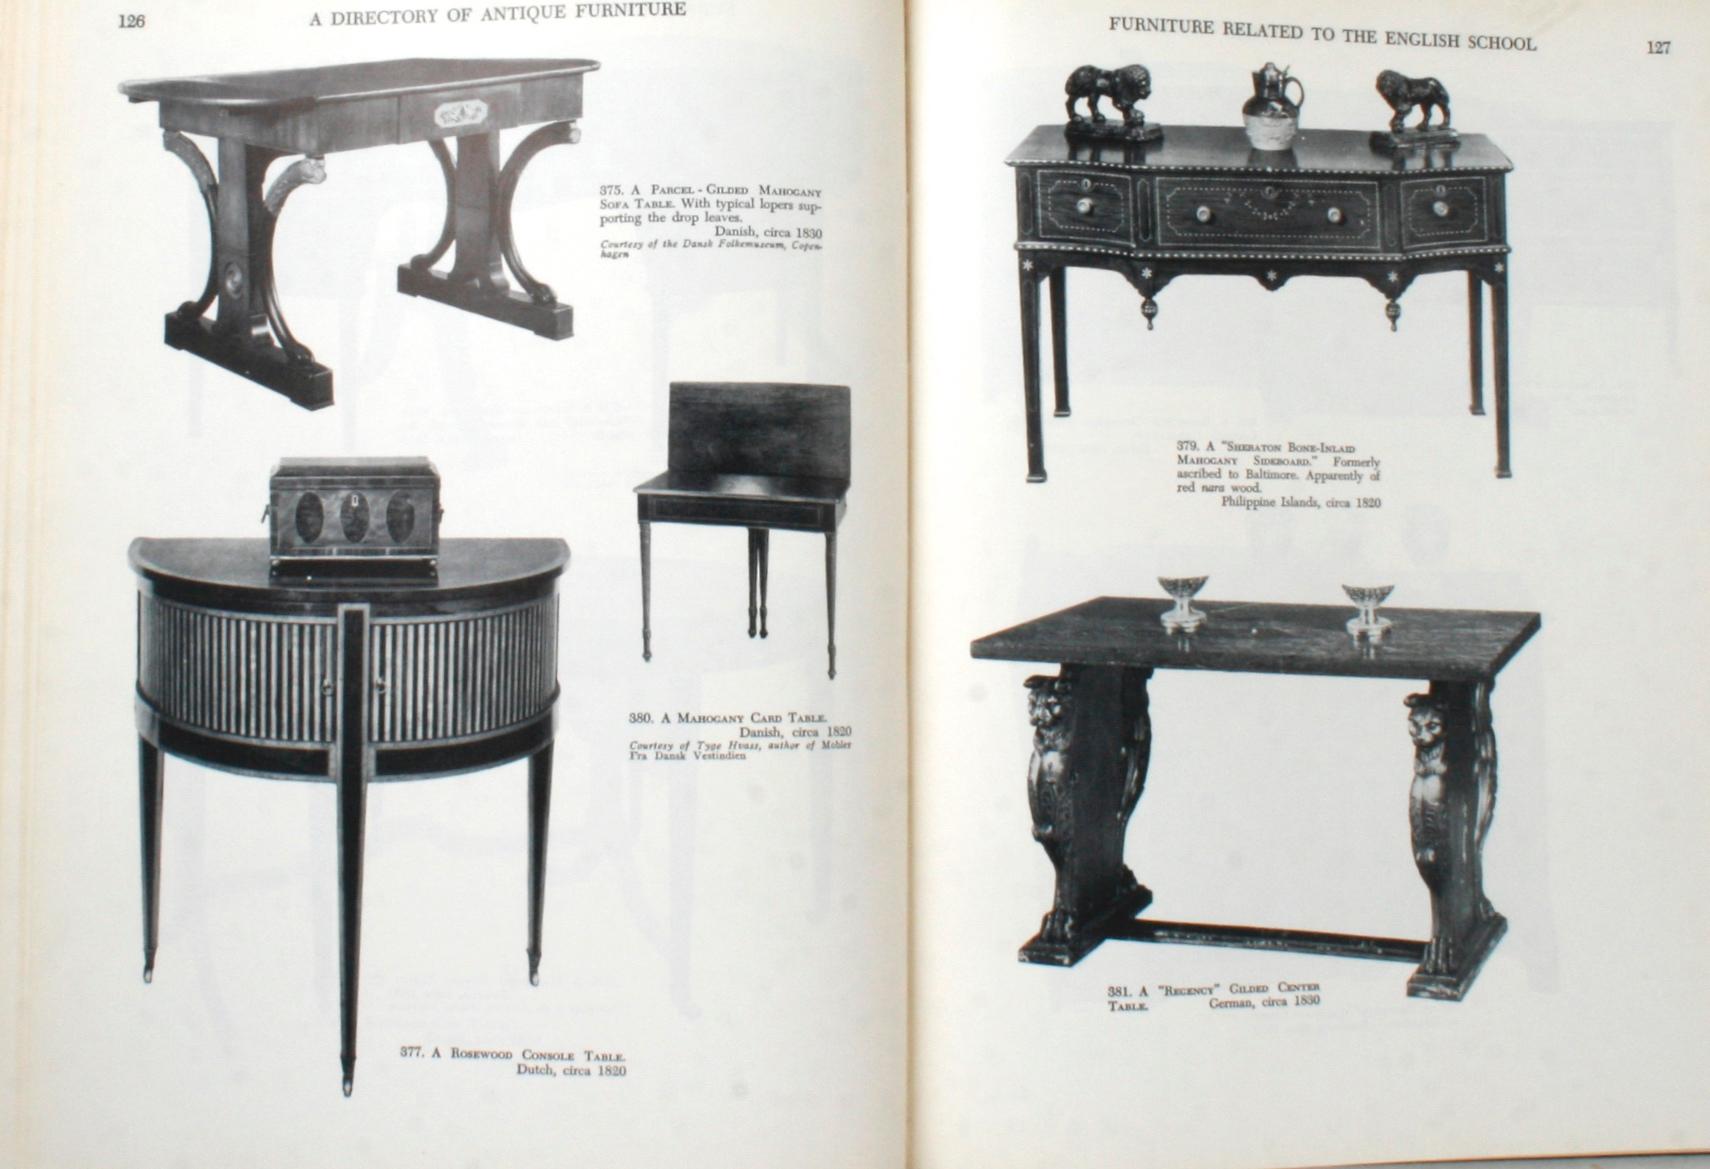 Directory of Antique Furniture by F. Lewis Hinckley 4